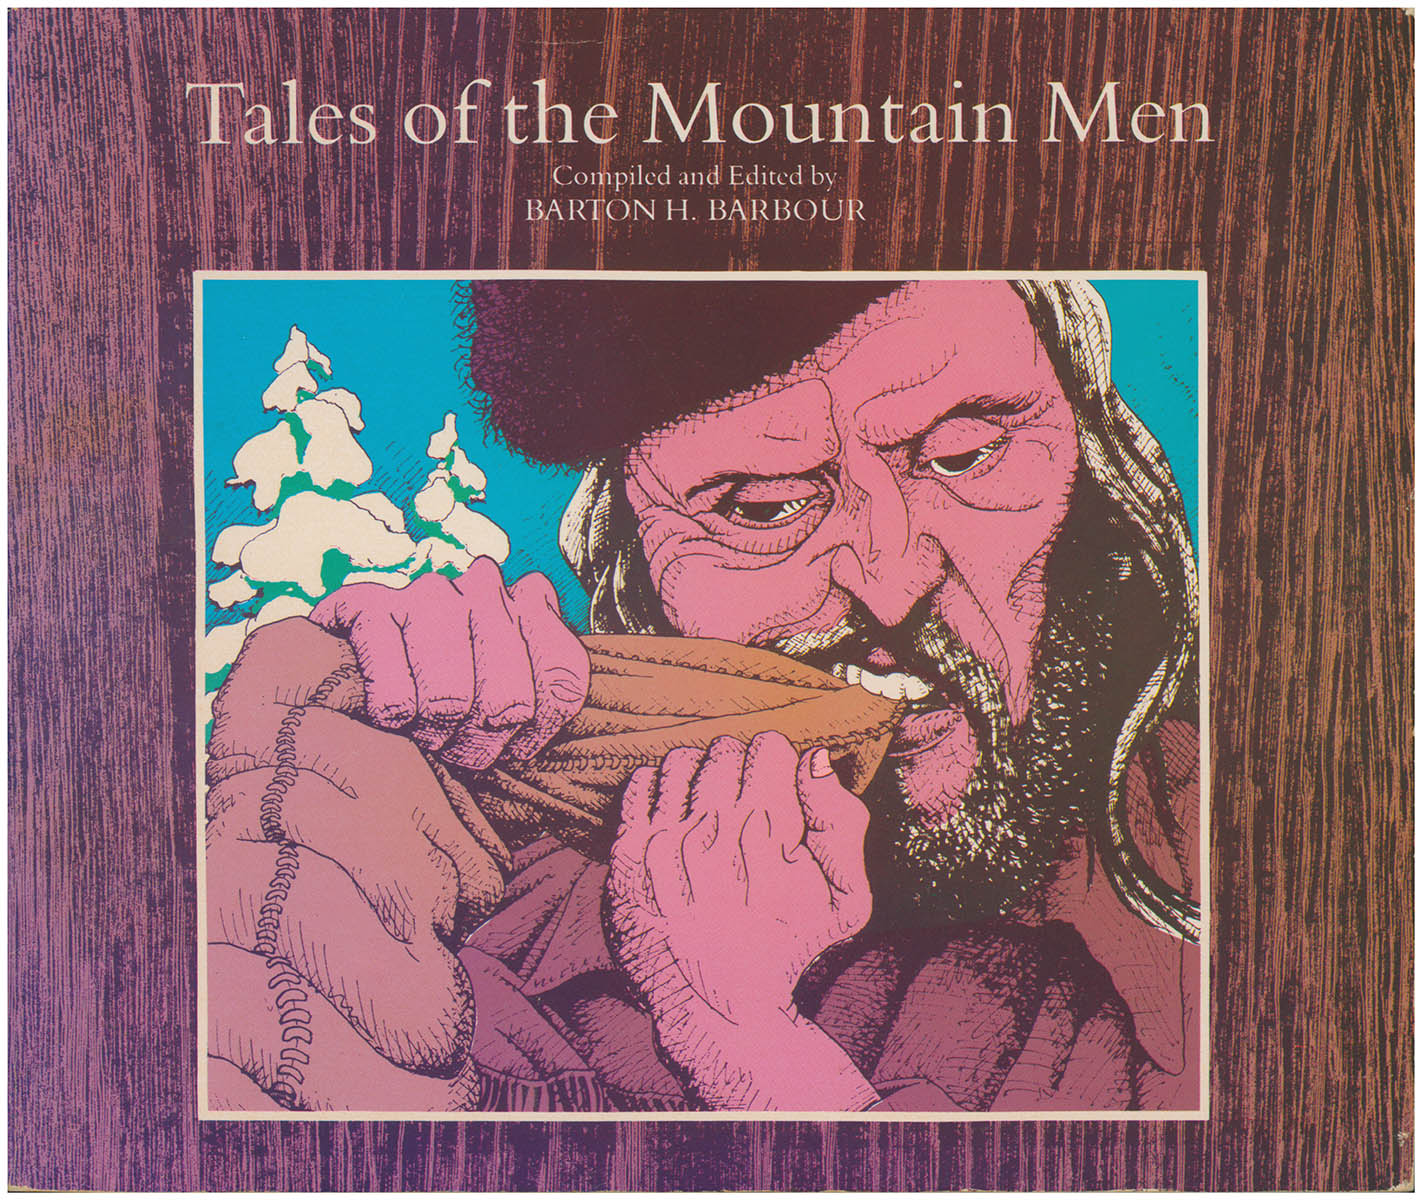 Barbour, Barton H. (editor) - Tales of the Mountain Men